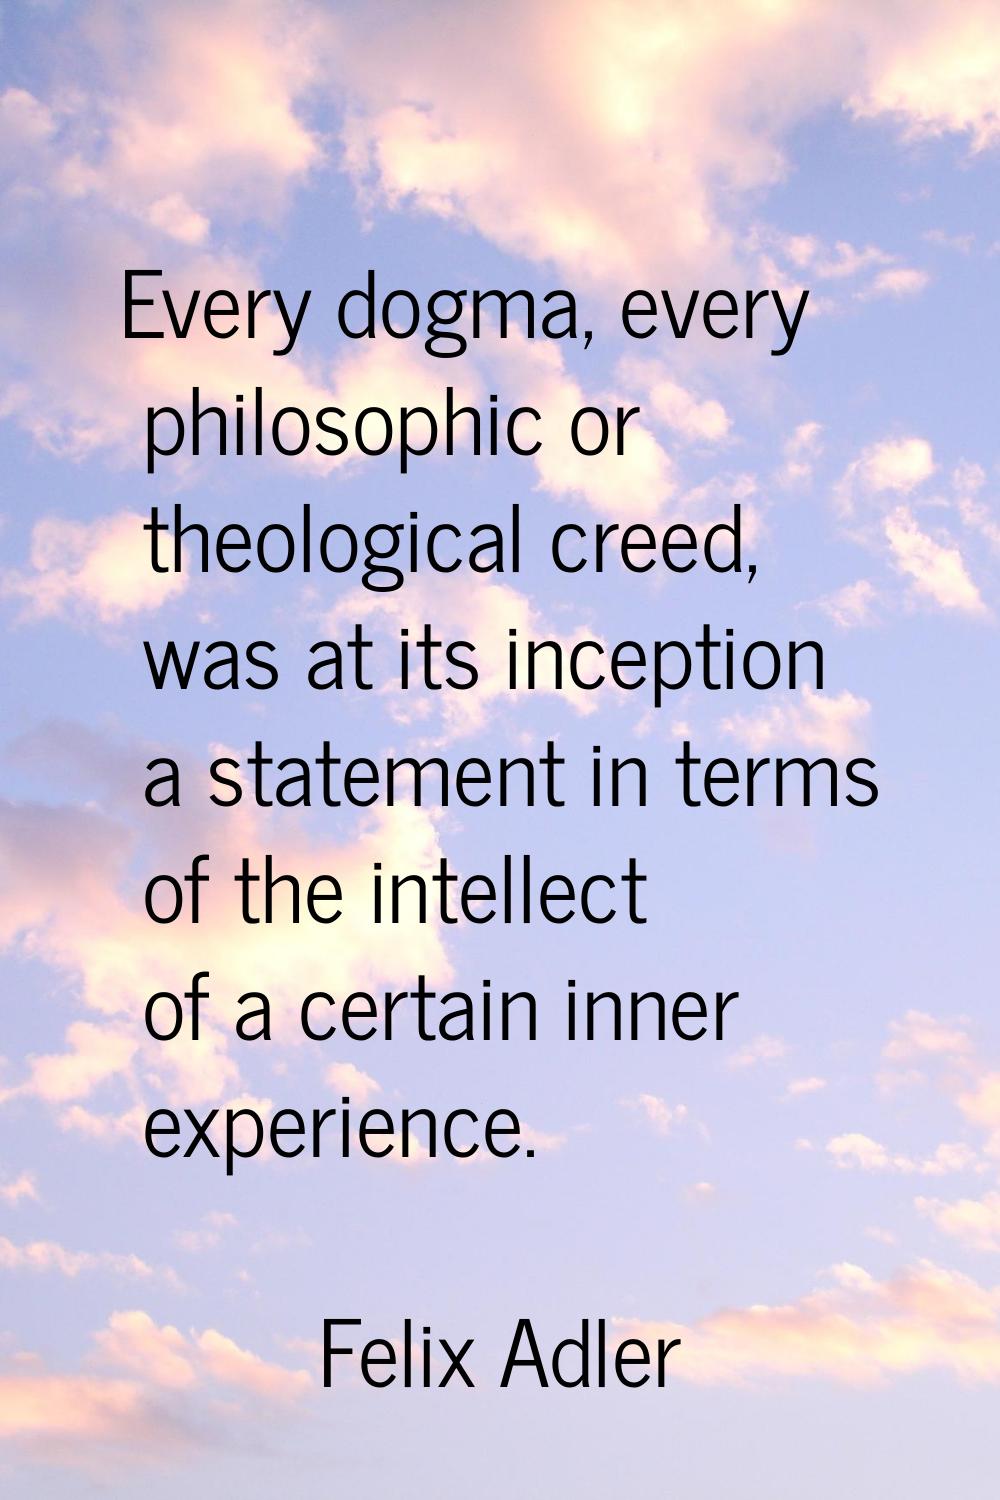 Every dogma, every philosophic or theological creed, was at its inception a statement in terms of t